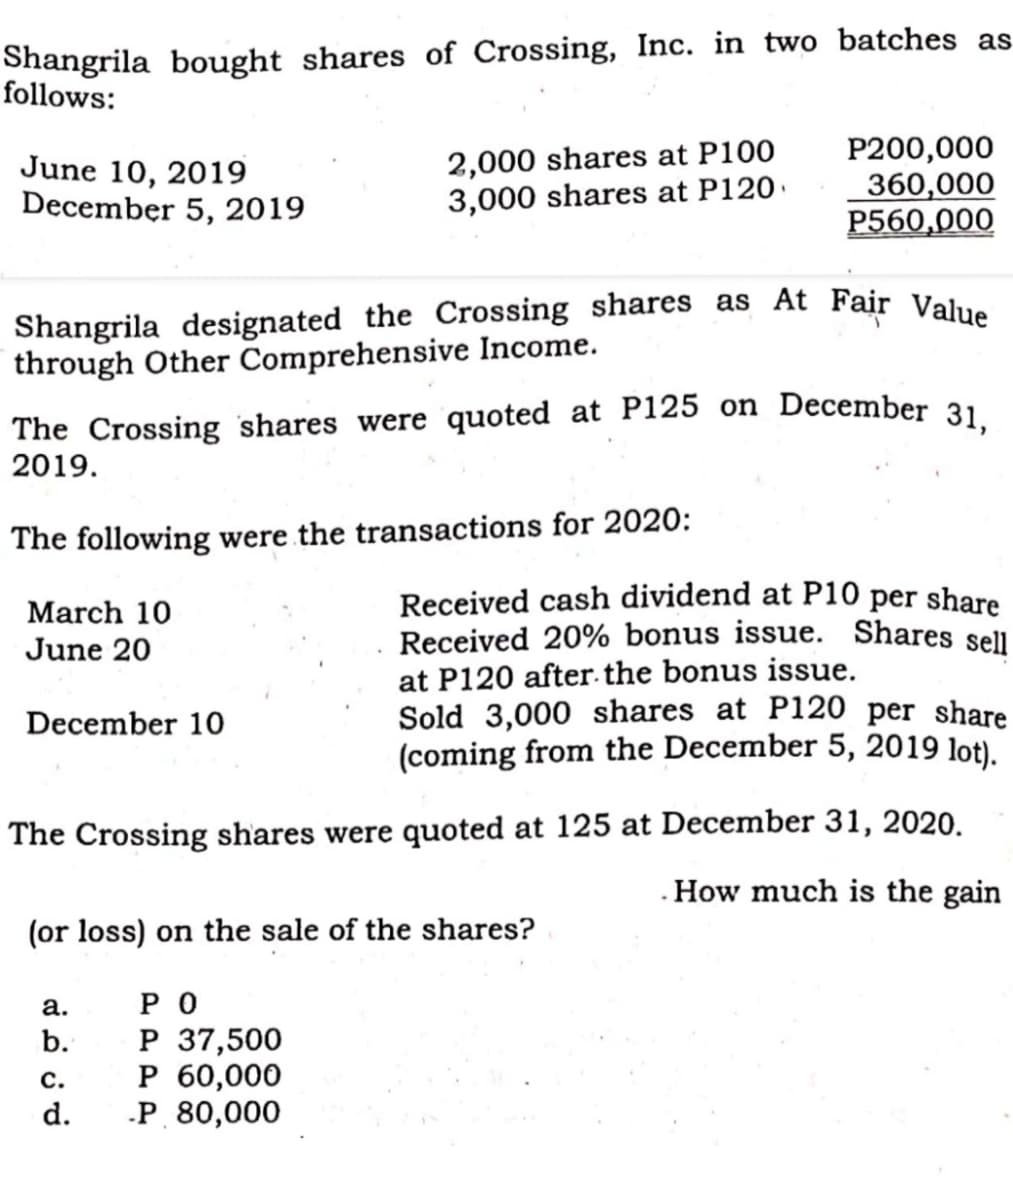 Shangrila designated the Crossing shares as At Fair Value
Shangrila bought shares of Crossing, Inc. in two batches as
follows:
June 10, 2019
December 5, 2019
2,000 shares at P100
3,000 shares at P120.
P200,000
360,000
P560,000
through Other Comprehensive Income.
The Crossing shares were quoted at P125 on December 31
2019.
The following were the transactions for 2020:
Received cash dividend at P10 per share
Received 20% bonus issue. Shares sell
at P120 after.the bonus issue.
Sold 3,000 shares at P120 per share
(coming from the December 5, 2019 lot).
March 10
June 20
December 10
The Crossing shares were quoted at 125 at December 31, 2020.
.How much is the gain
(or loss) on the sale of the shares?
P O
P 37,500
P 60,000
-P 80,000
а.
b.
c.
d.
